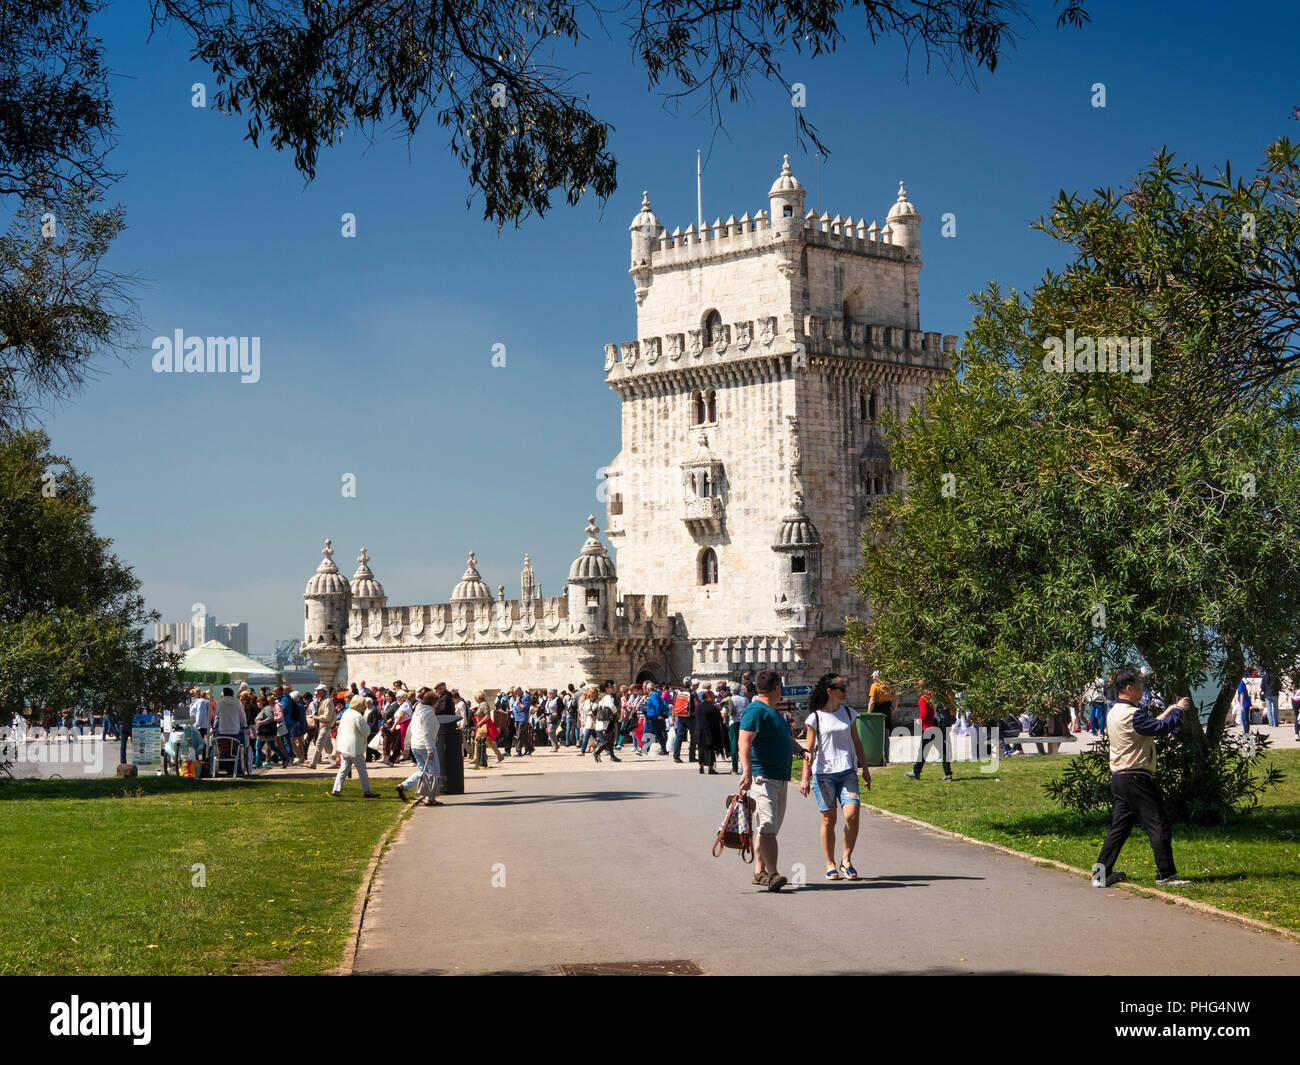 Portugal, Lisbon, Belem, Torre de Belem, Belém Tower, fortified 1515 tower used to view approaching shipping Stock Photo